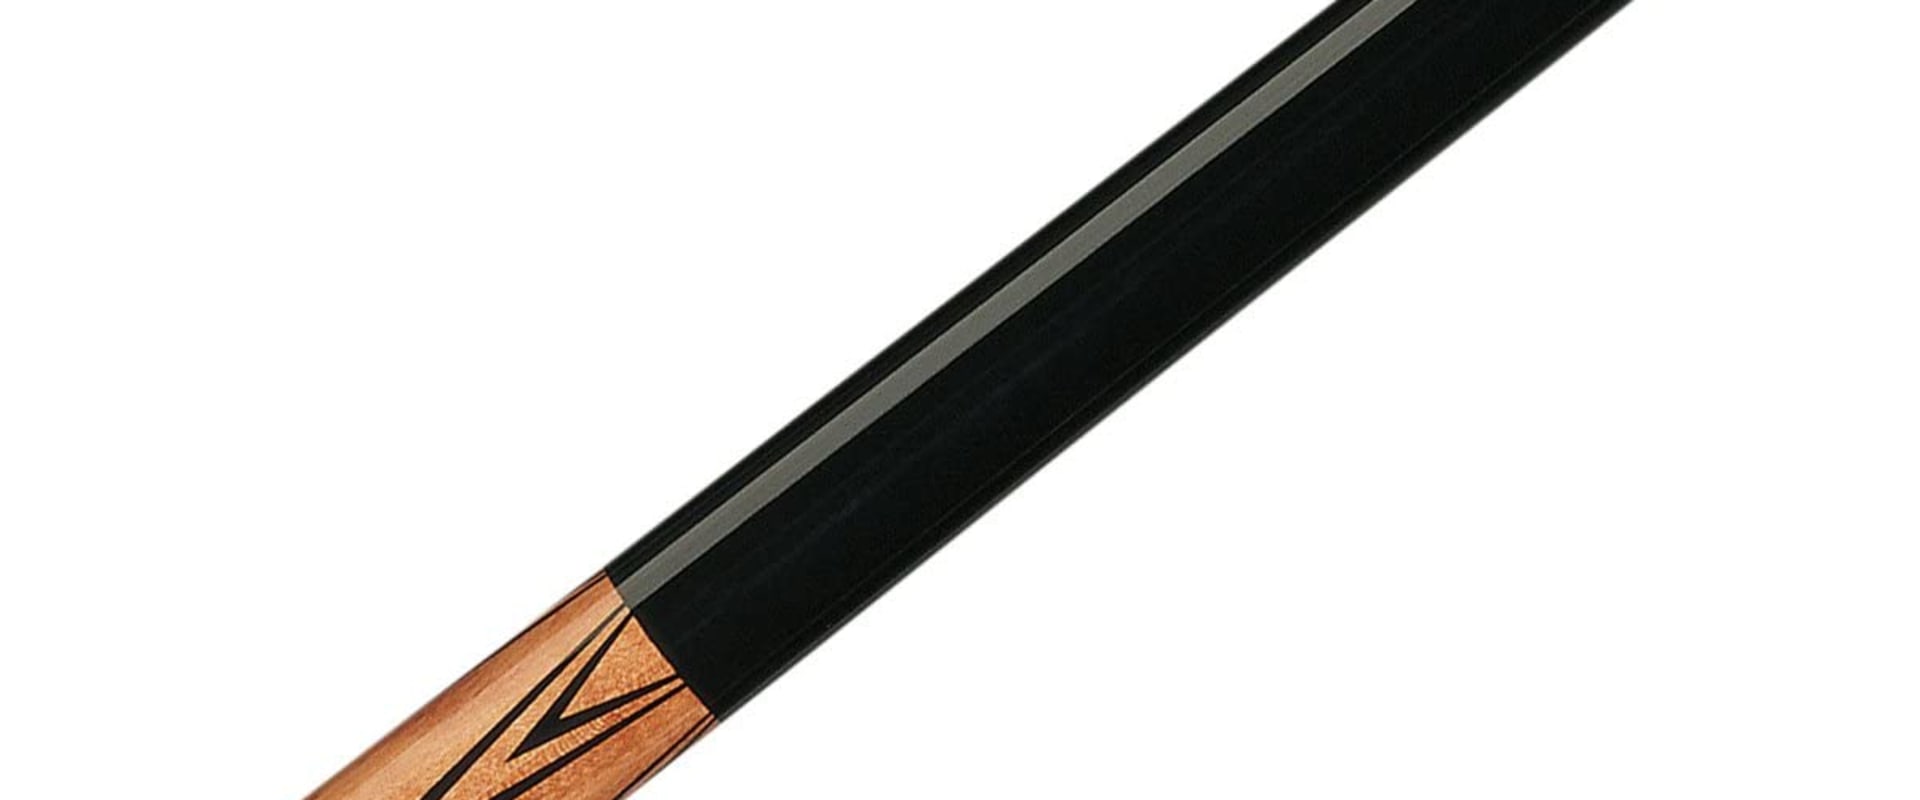 What are some good pool cues?